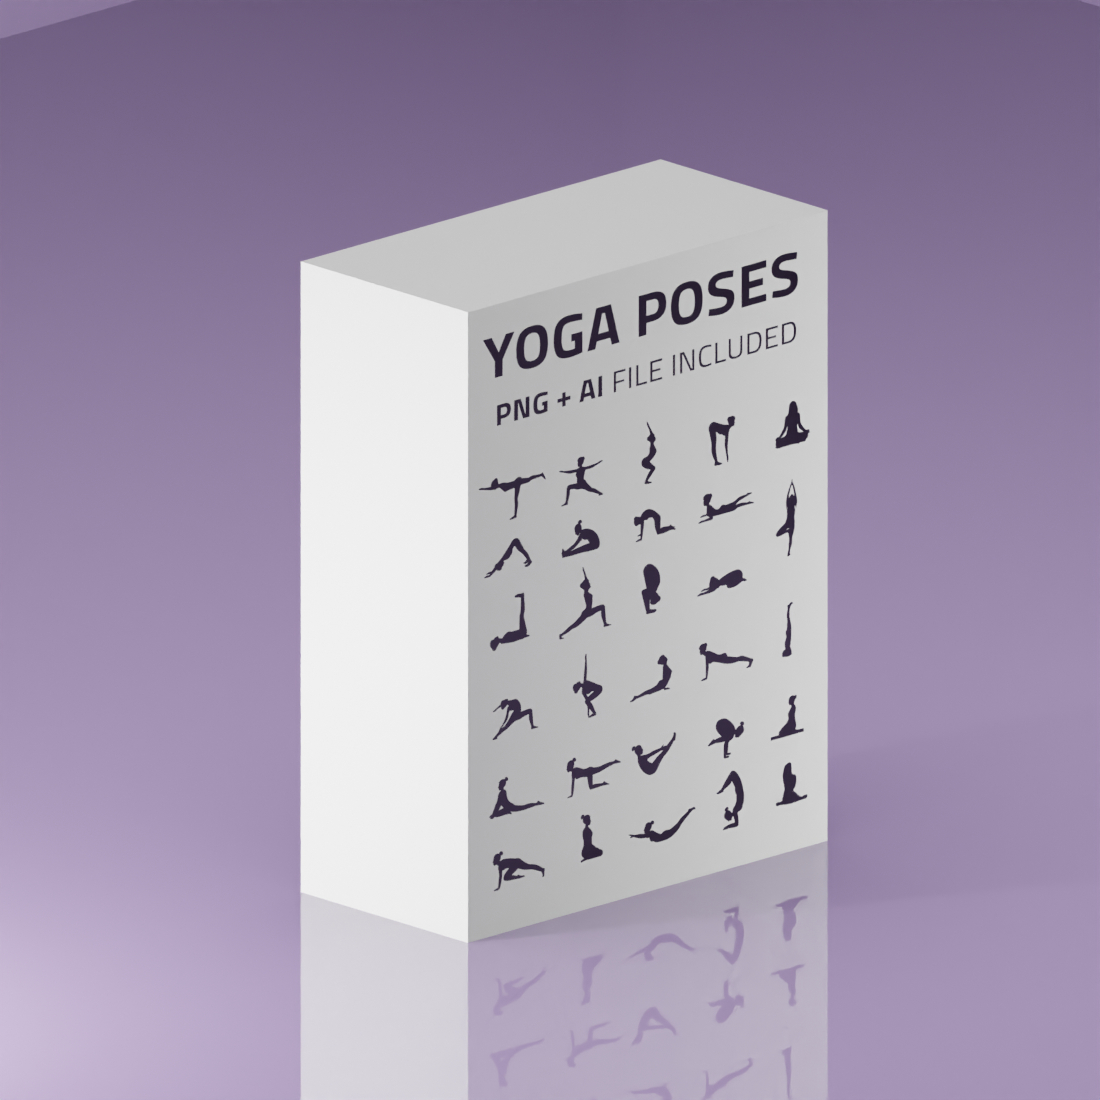 YOGA POSES - VECTOR ILLUSTRATIONS cover image.